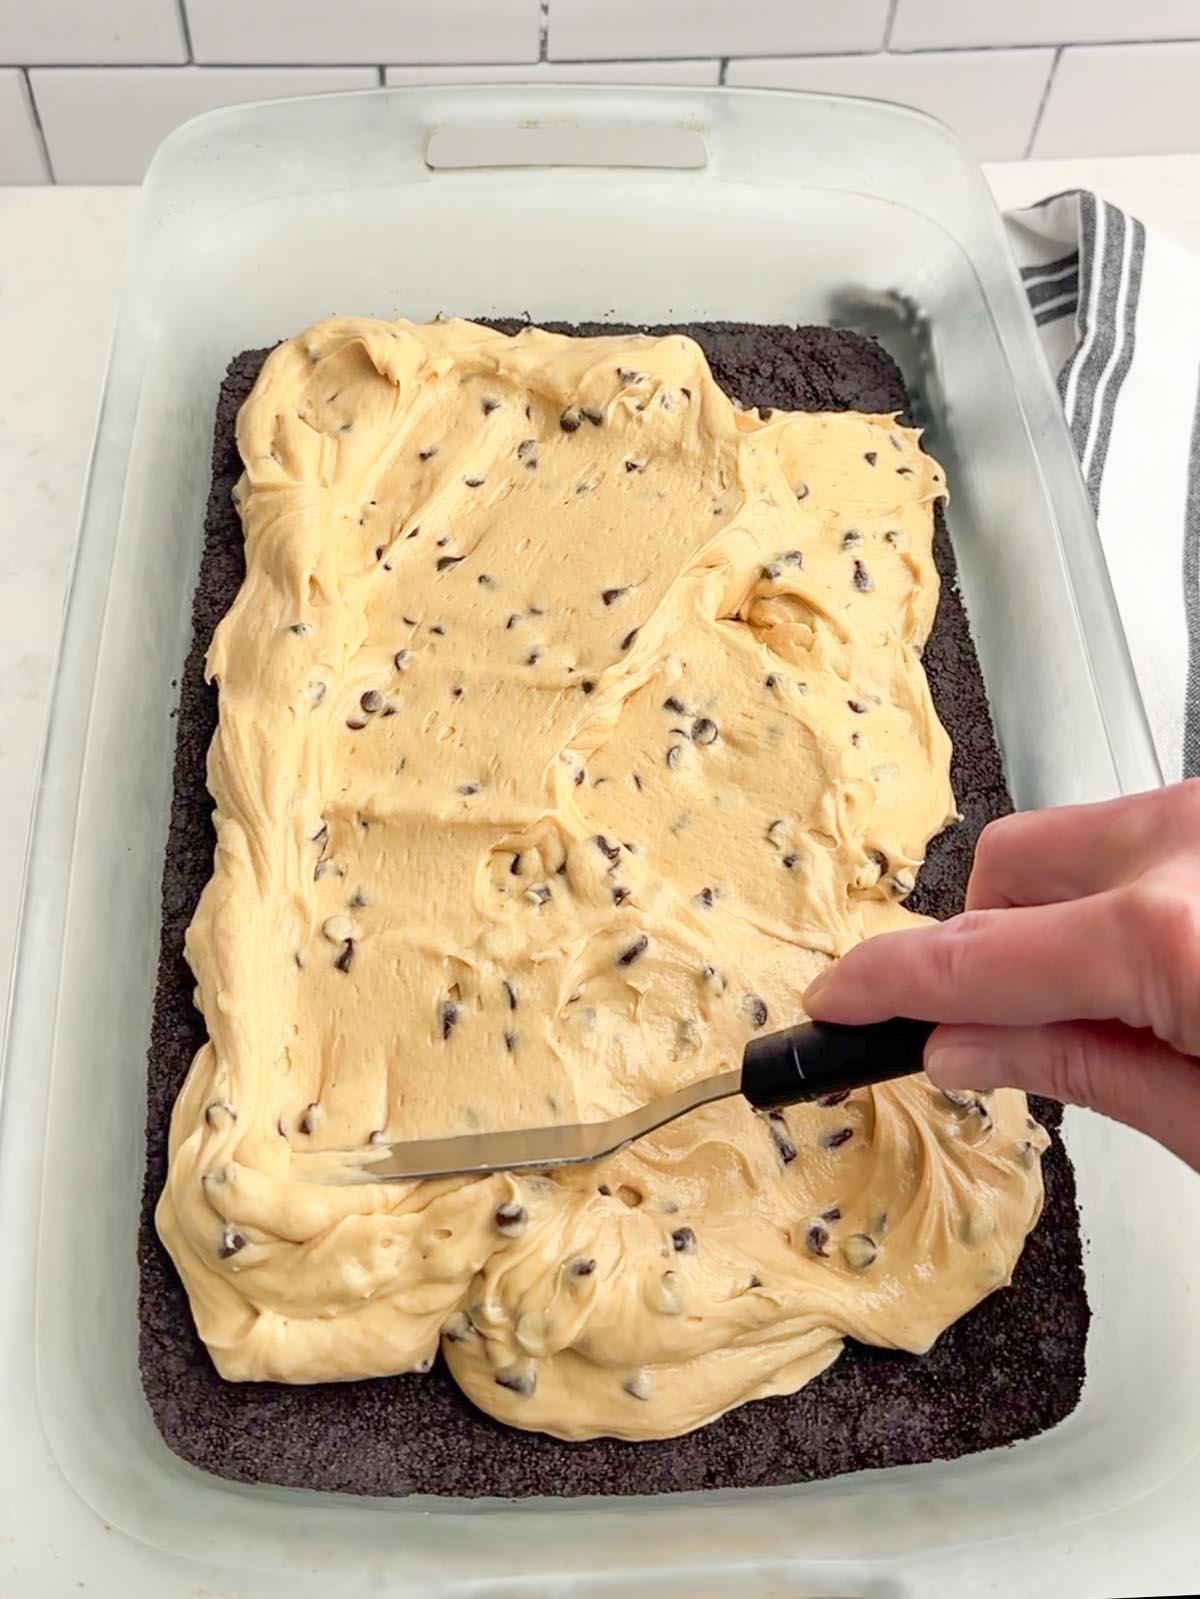 hand holding a spatula spreading peanut butter layer over Oreo layer